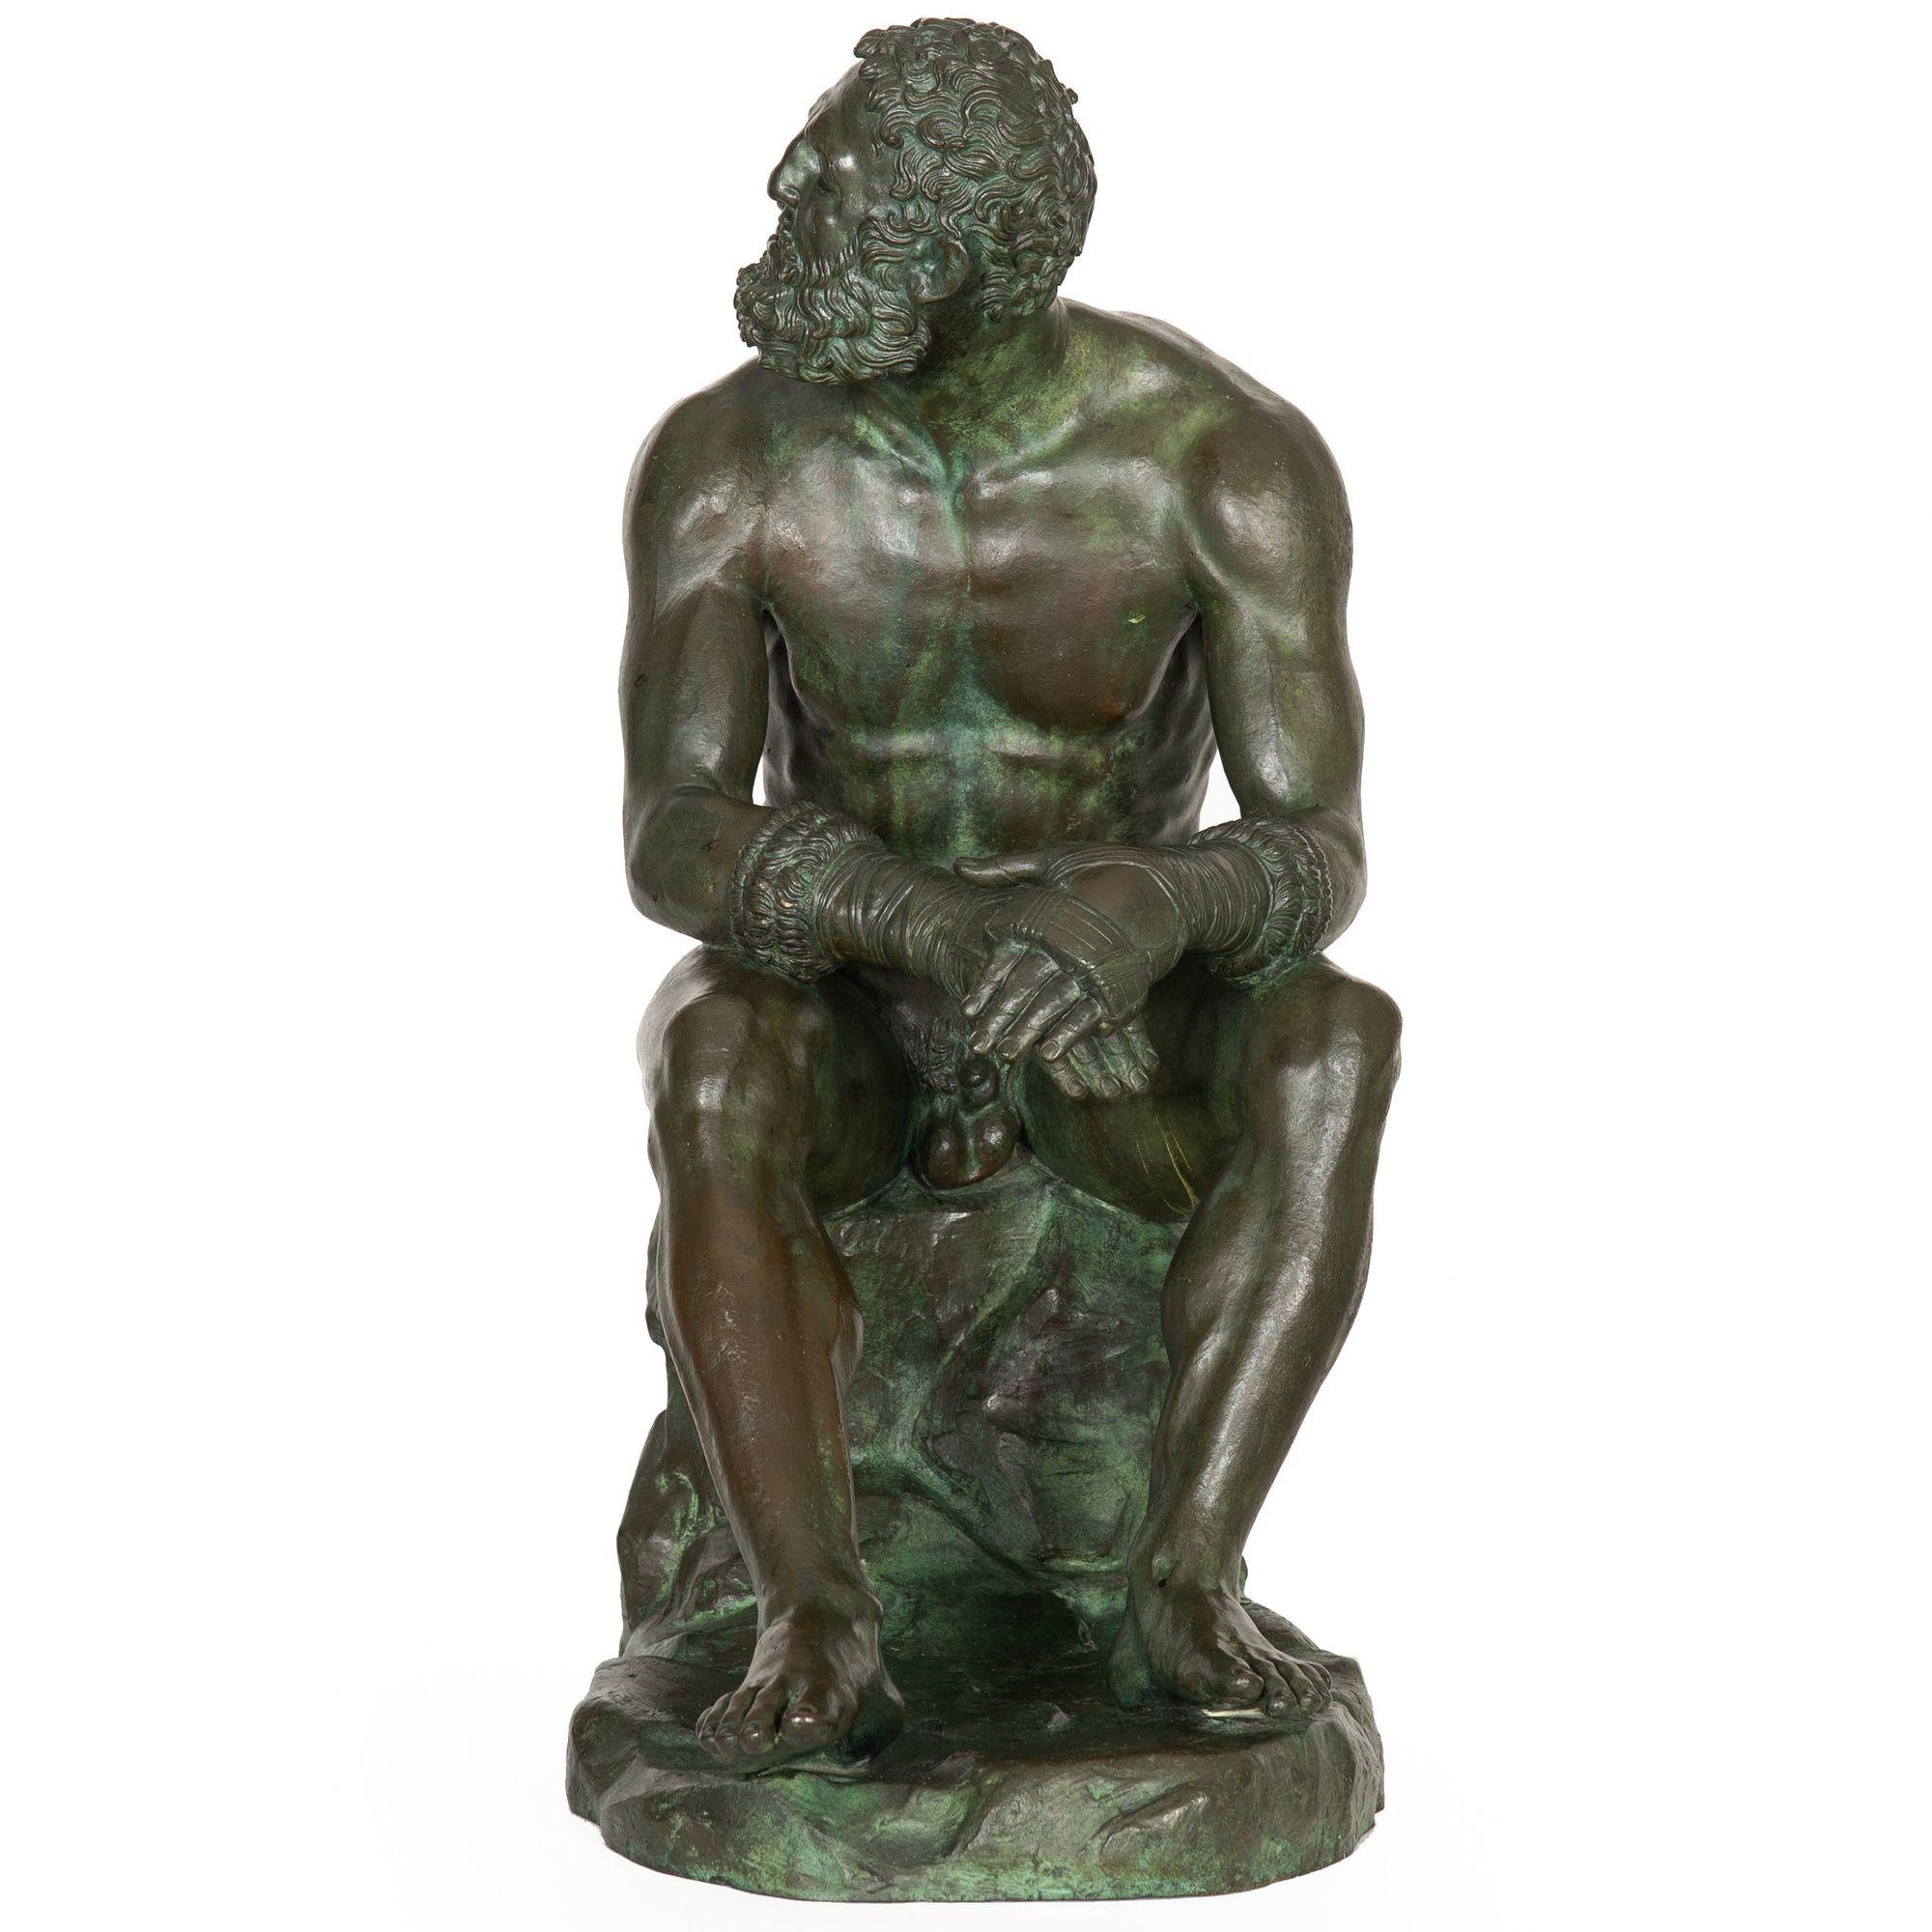 A rather uncommon sculpture to find on the open market, this 19th century copy from the Grand Tour era captures the famous 